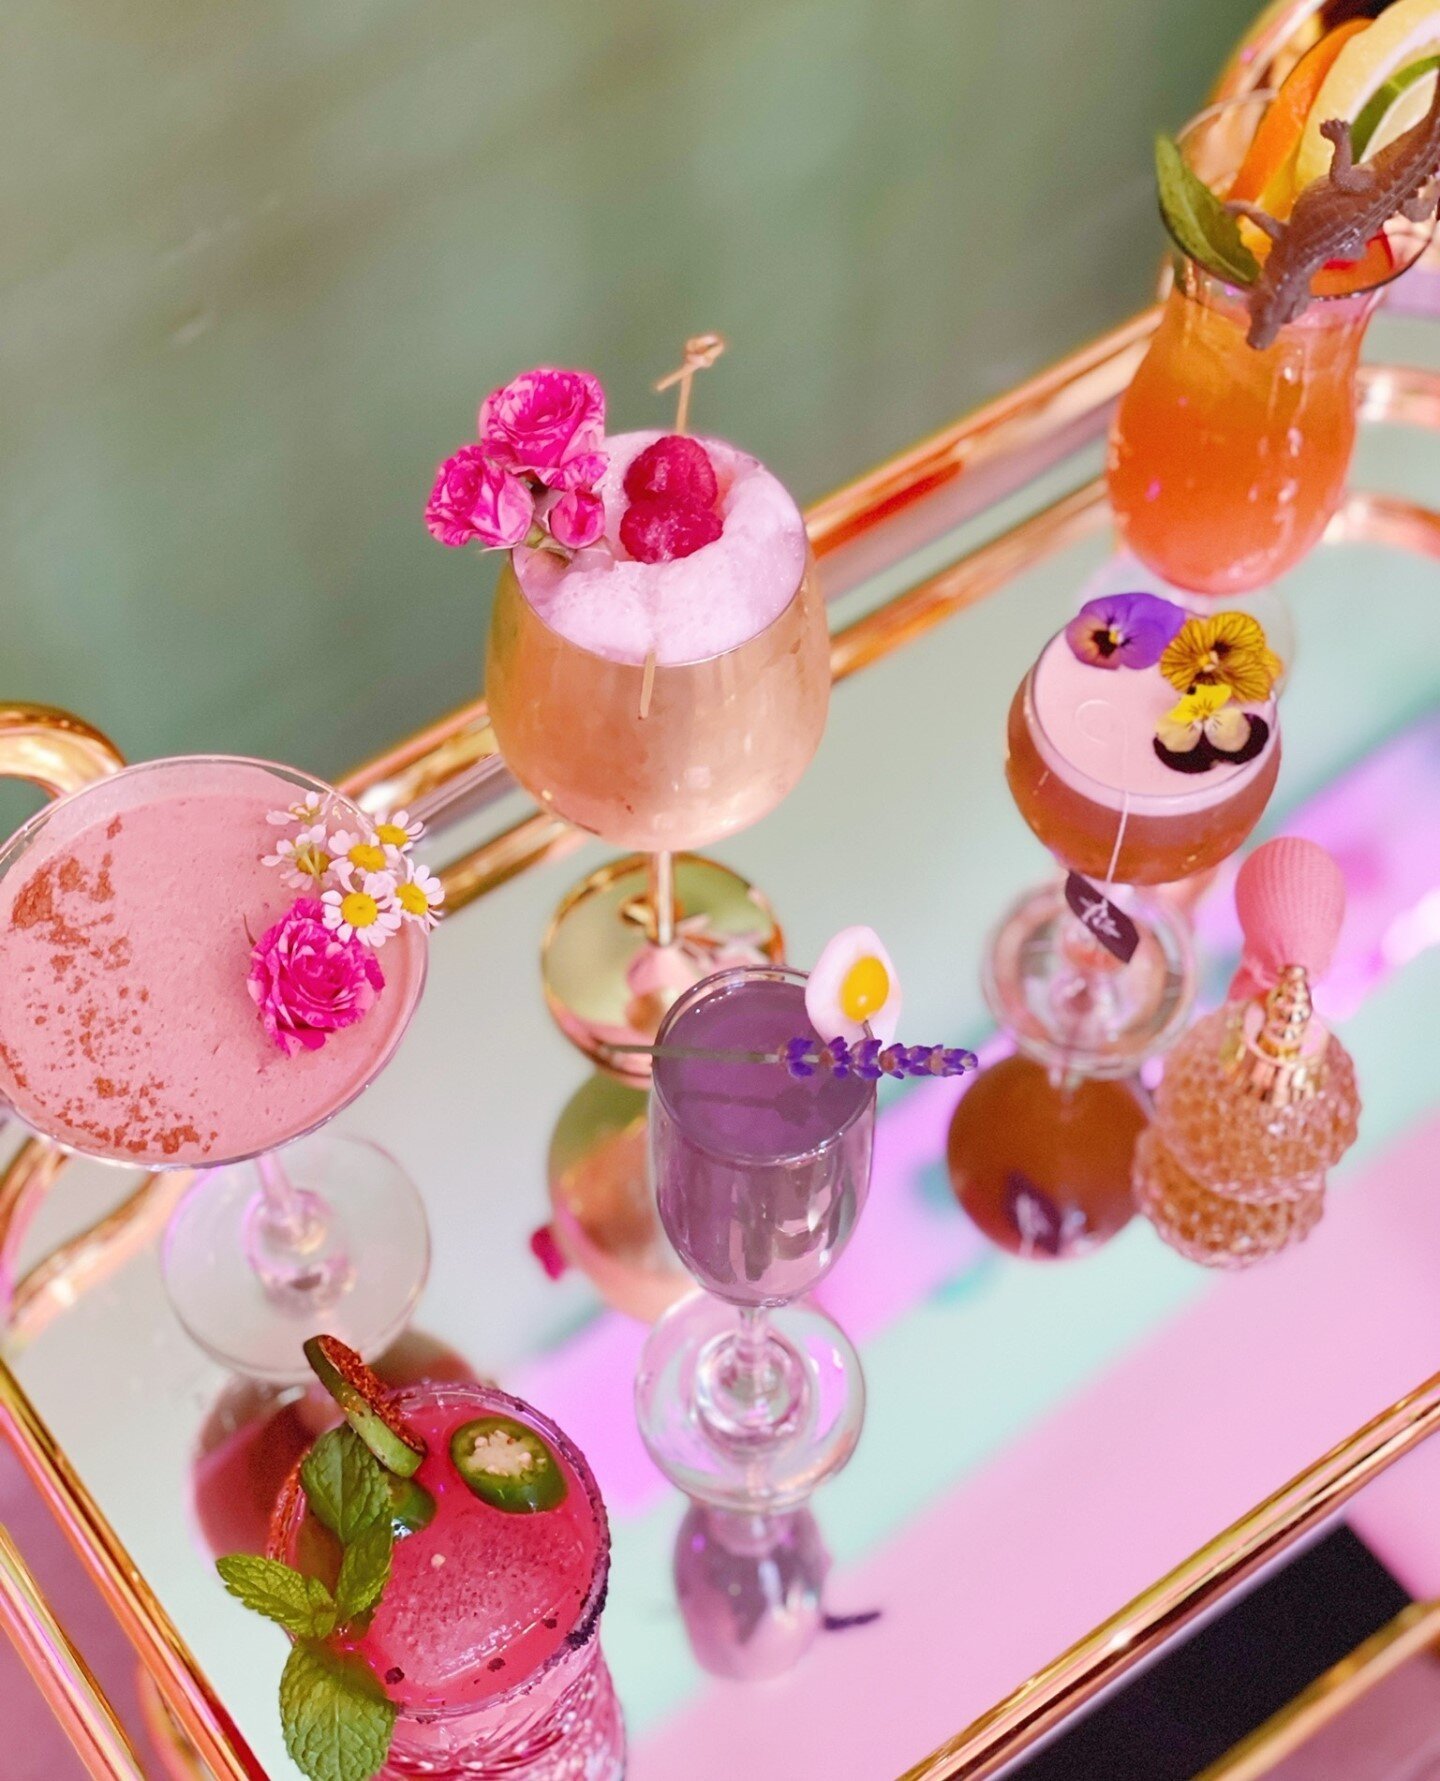 A wise lady once said, &ldquo;When you've reached the bottom, there's always a cocktail waiting&rdquo;.... We're not sure which wise lady, but we're gonna roll with it.⁠
⁠
#BreakfastAndBubbles #TasteTheStars #BuongiornoPrincipessa #SanDiegoCocktails⁠